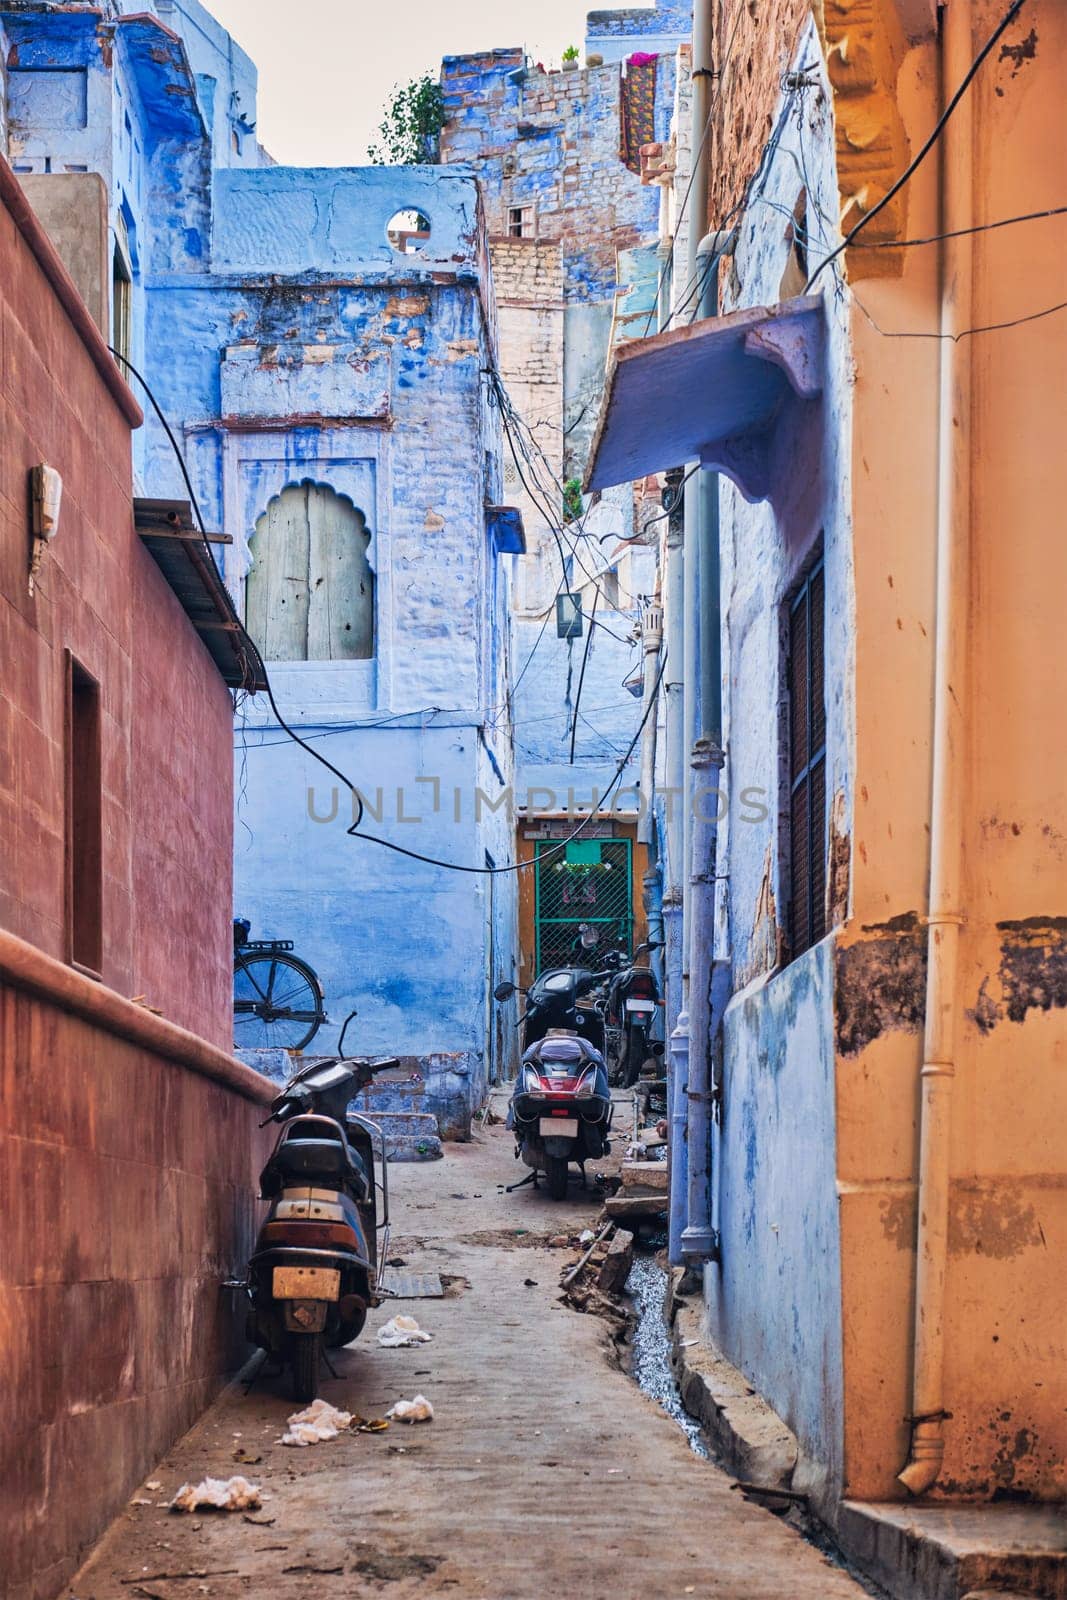 Blue houses in streets of of Jodhpur, also known as Blue City due to the vivid blue-painted Brahmin houses, Jodhpur, Rajasthan, India